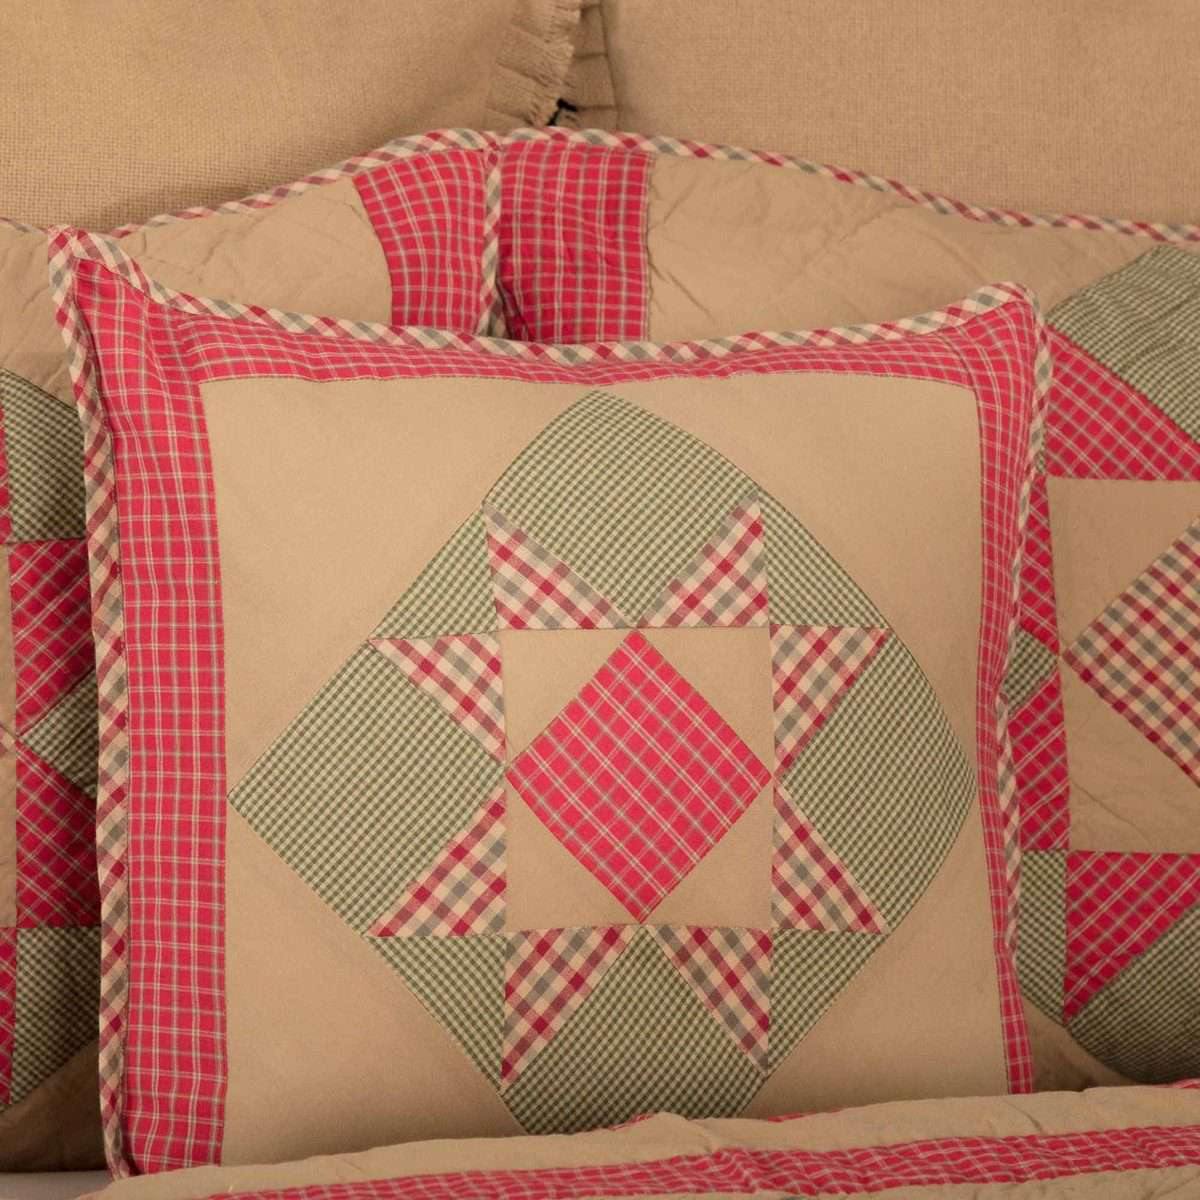 Dolly Star Patchwork Pillow 18x18 VHC Brands